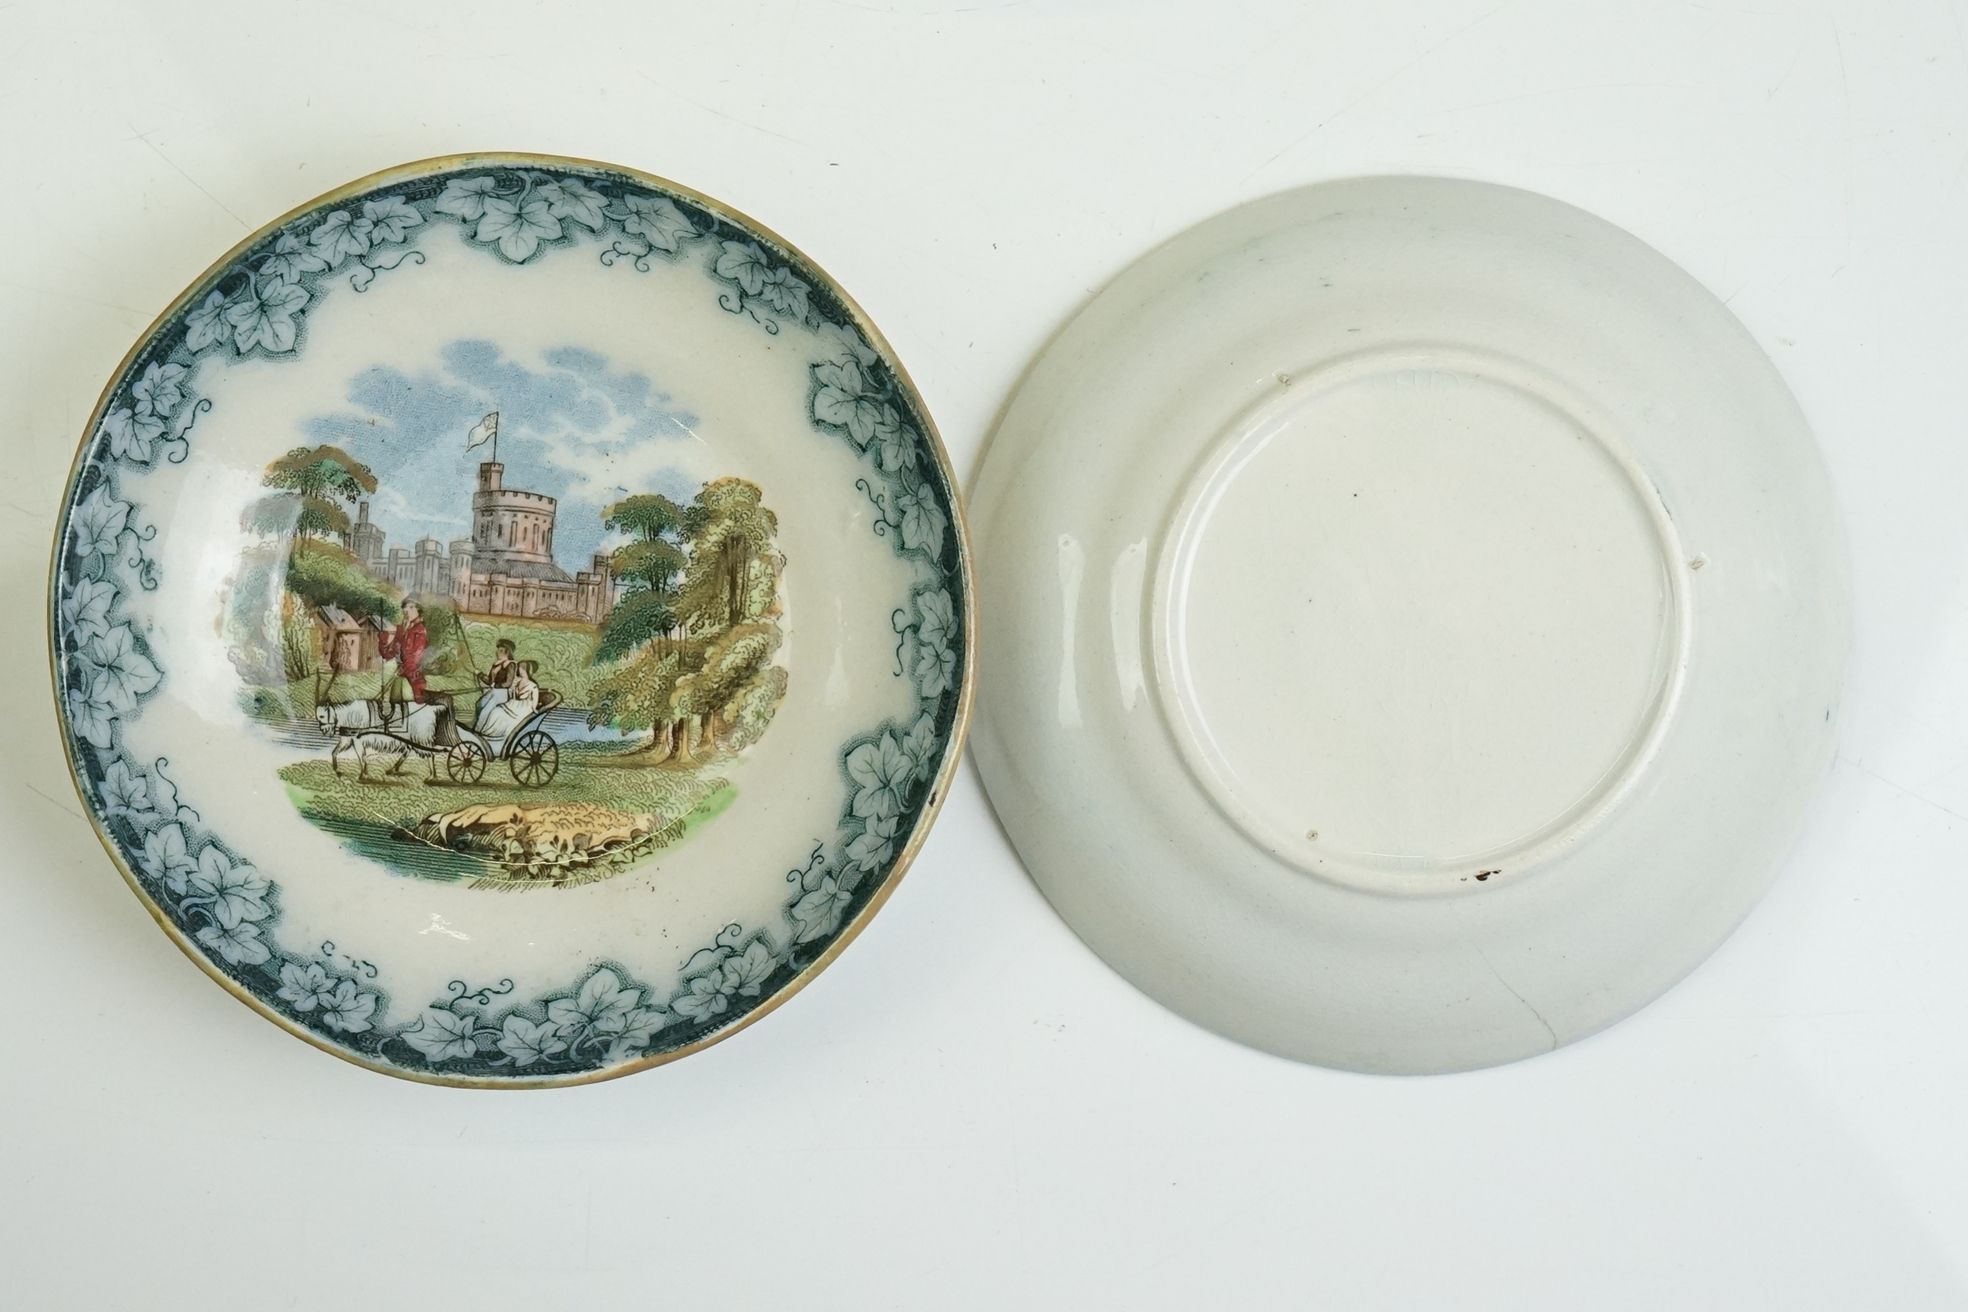 19th century Staffordshire Pottery Child's part Tea Set with transfer decoration of a goat pulling a - Image 10 of 10